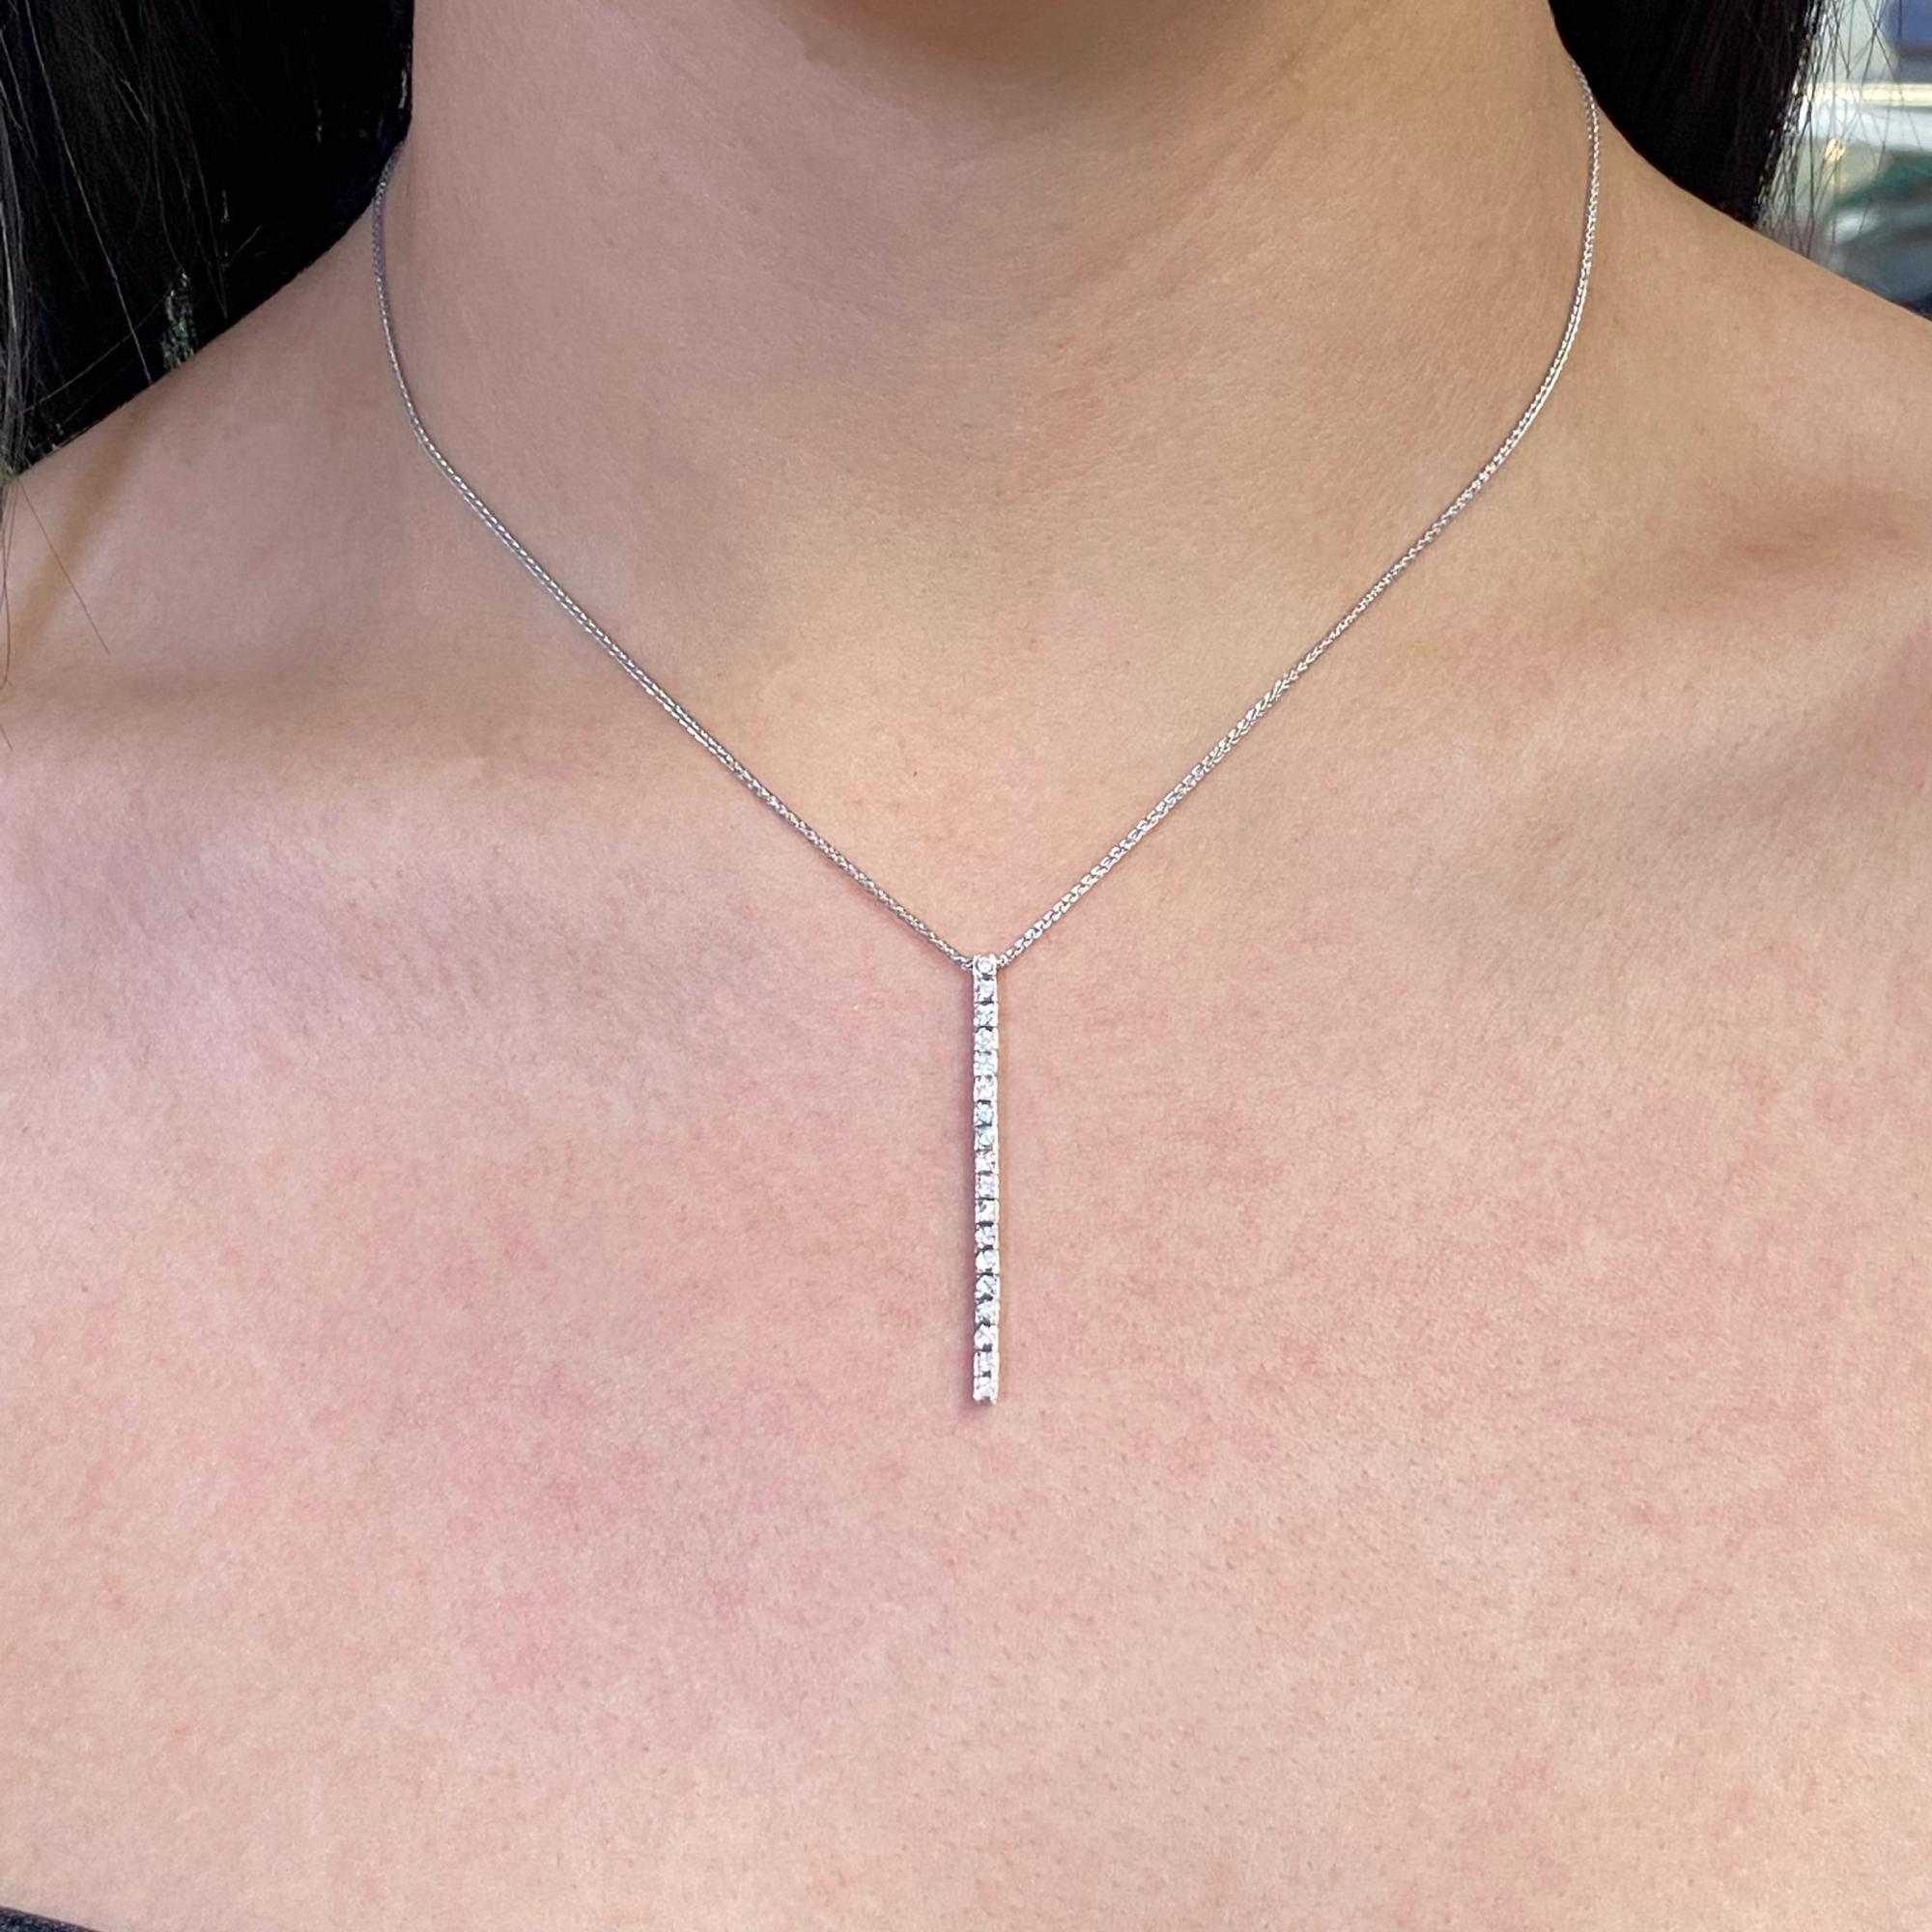 Piero Milano 1 Row Natural Diamond Drop Pendant Necklace 18k White Gold 0.40cttw In New Condition For Sale In New York, NY